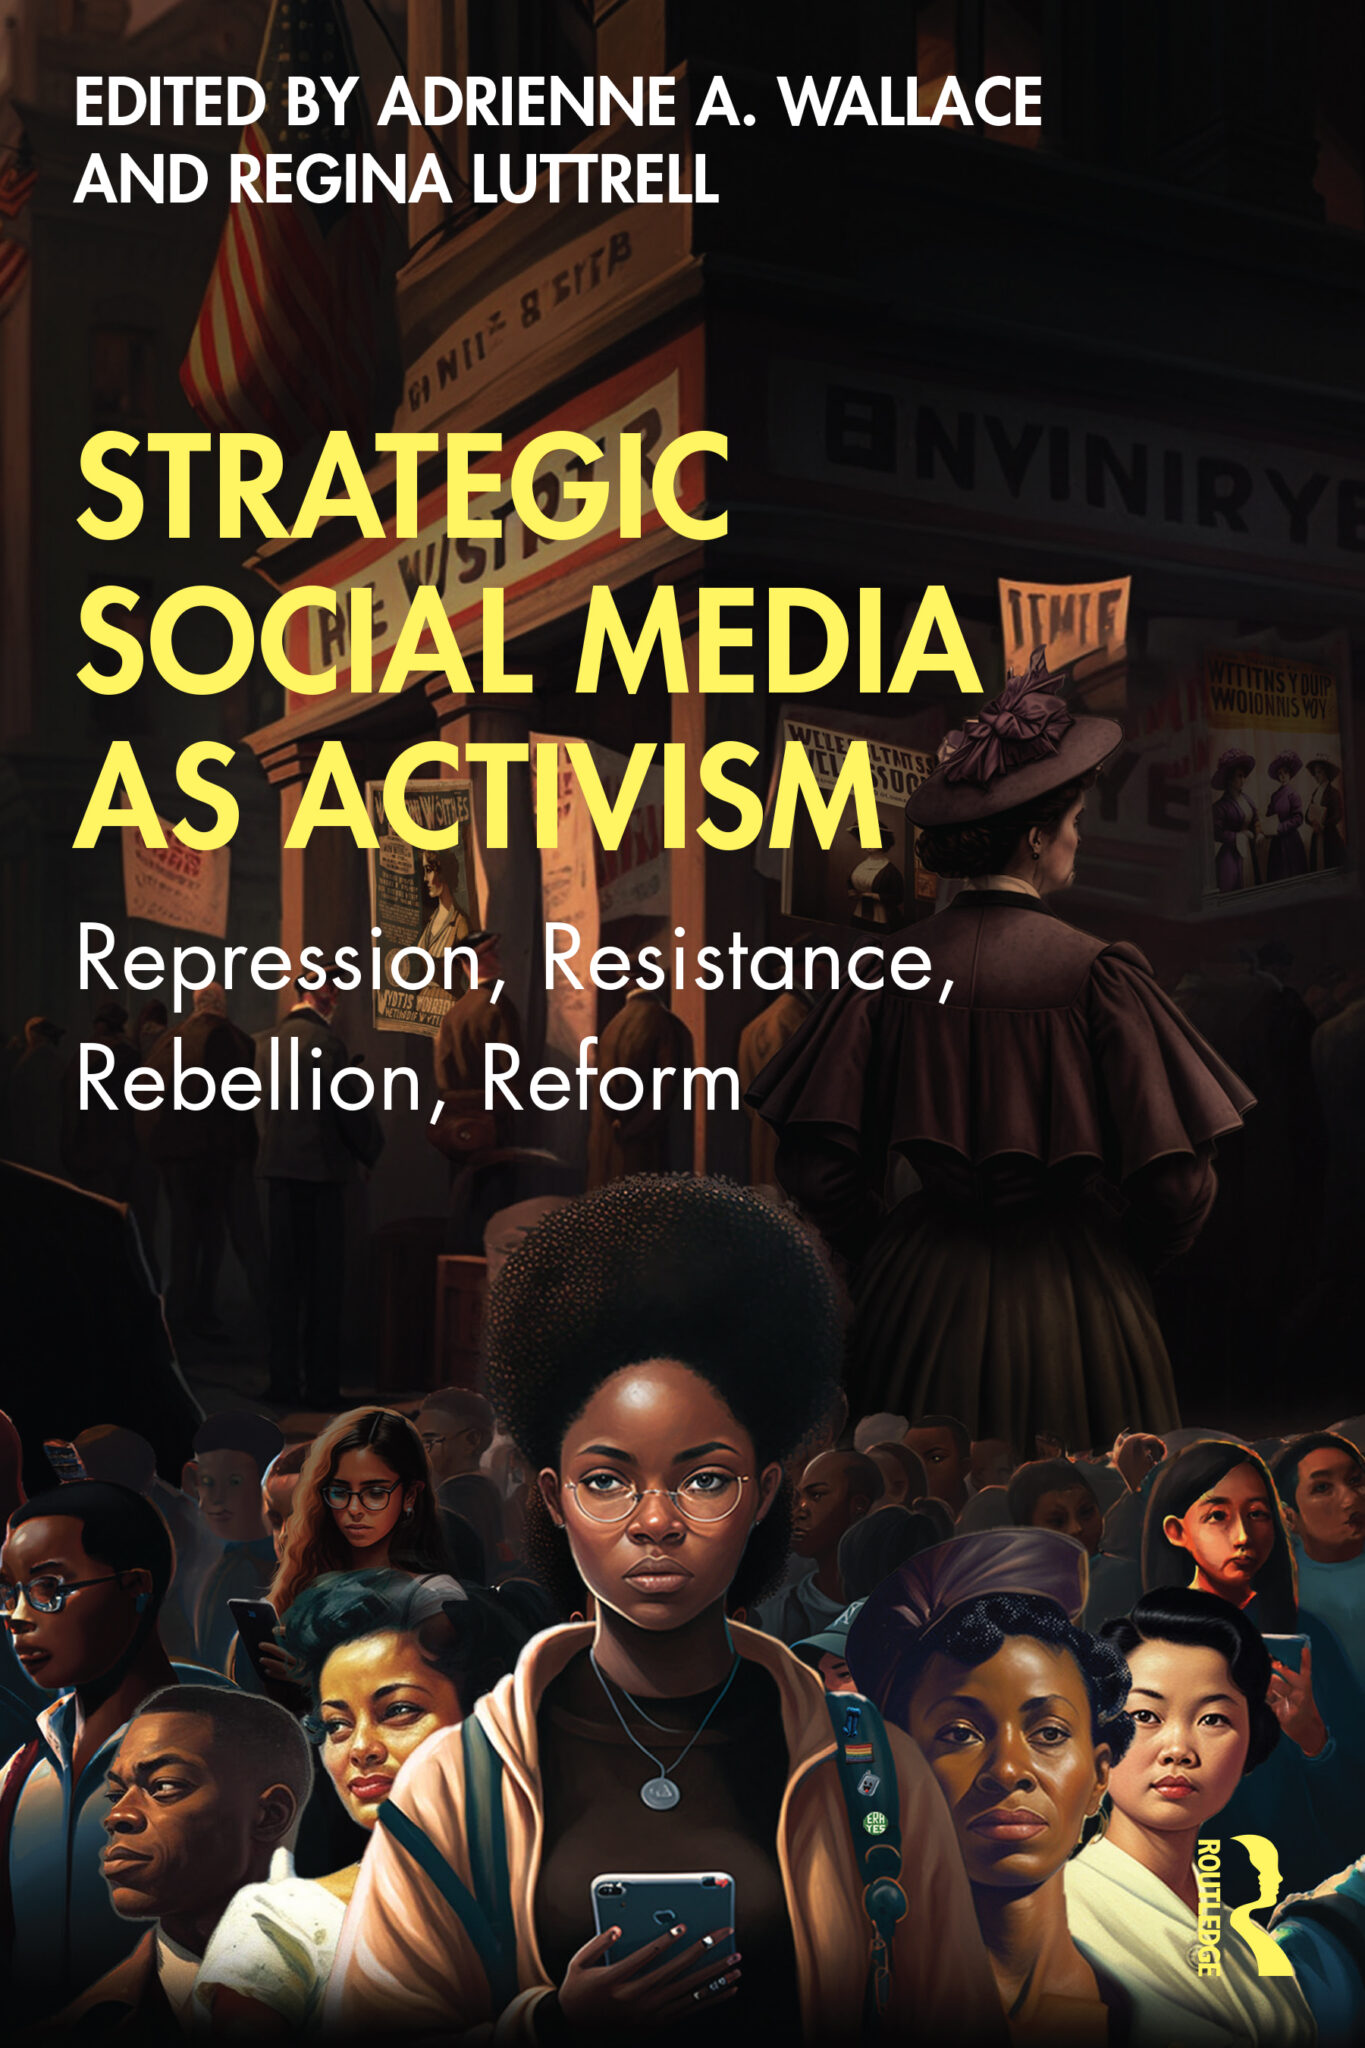 The cover of "Strategic Social Media as Activism Repression, Resistance, Rebellion, Reform," in which a young woman stands surrounded by other people representing current and past activism